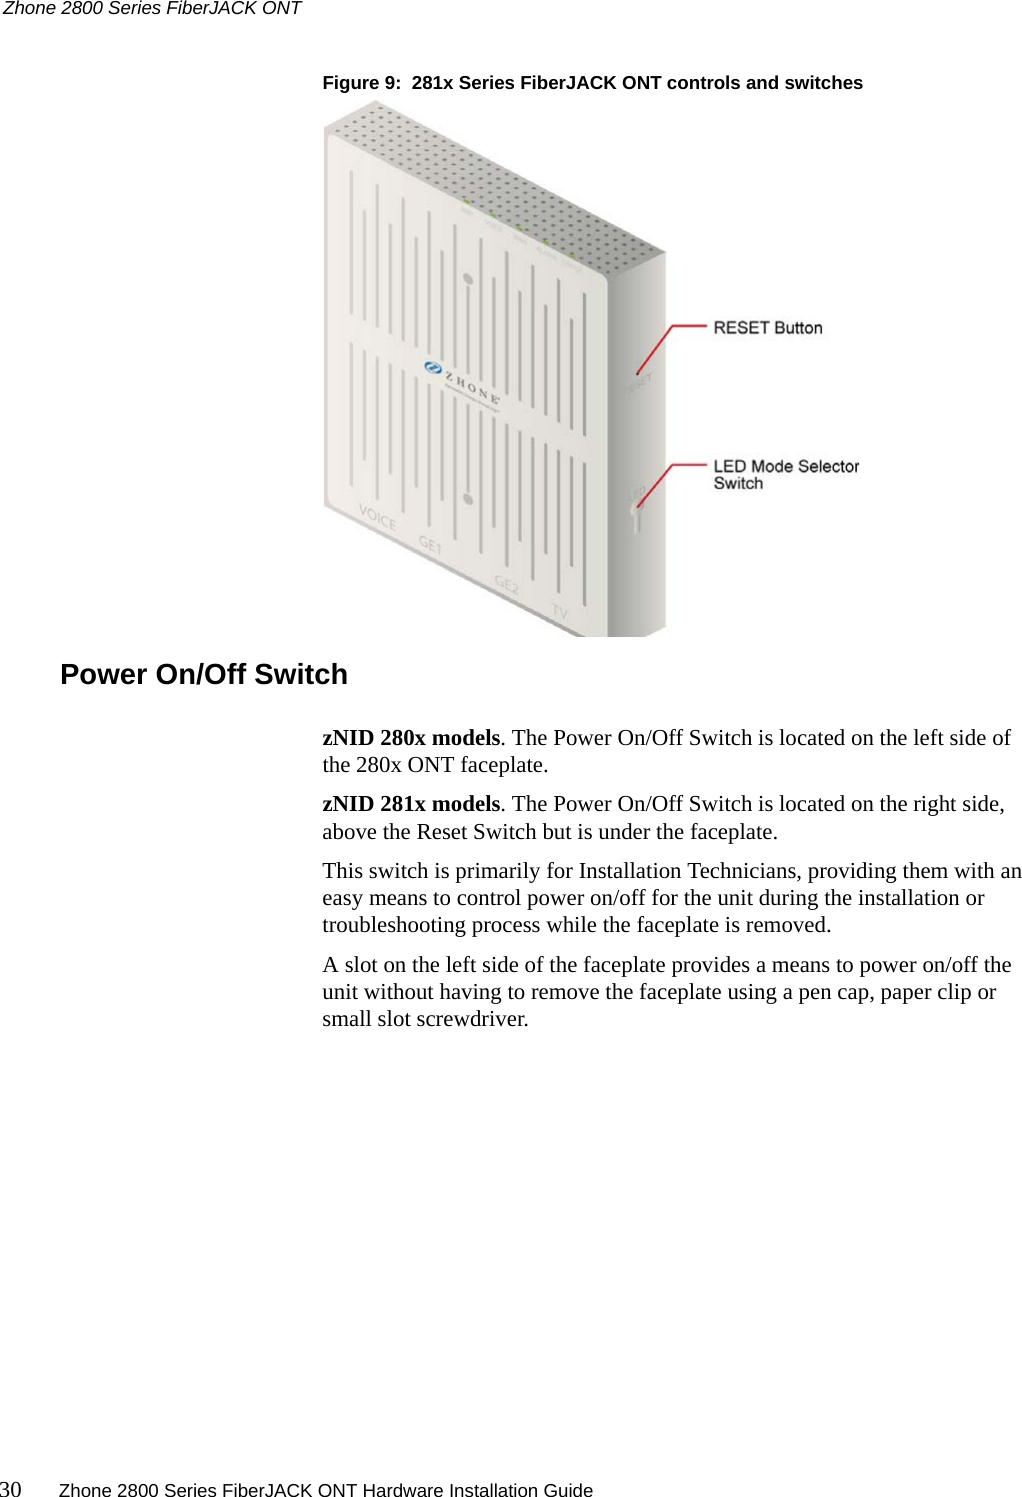 Zhone 2800 Series FiberJACK ONT30 Zhone 2800 Series FiberJACK ONT Hardware Installation Guide   Figure 9:  281x Series FiberJACK ONT controls and switchesPower On/Off SwitchzNID 280x models. The Power On/Off Switch is located on the left side of the 280x ONT faceplate.  zNID 281x models. The Power On/Off Switch is located on the right side, above the Reset Switch but is under the faceplate.This switch is primarily for Installation Technicians, providing them with an easy means to control power on/off for the unit during the installation or troubleshooting process while the faceplate is removed.  A slot on the left side of the faceplate provides a means to power on/off the unit without having to remove the faceplate using a pen cap, paper clip or small slot screwdriver.